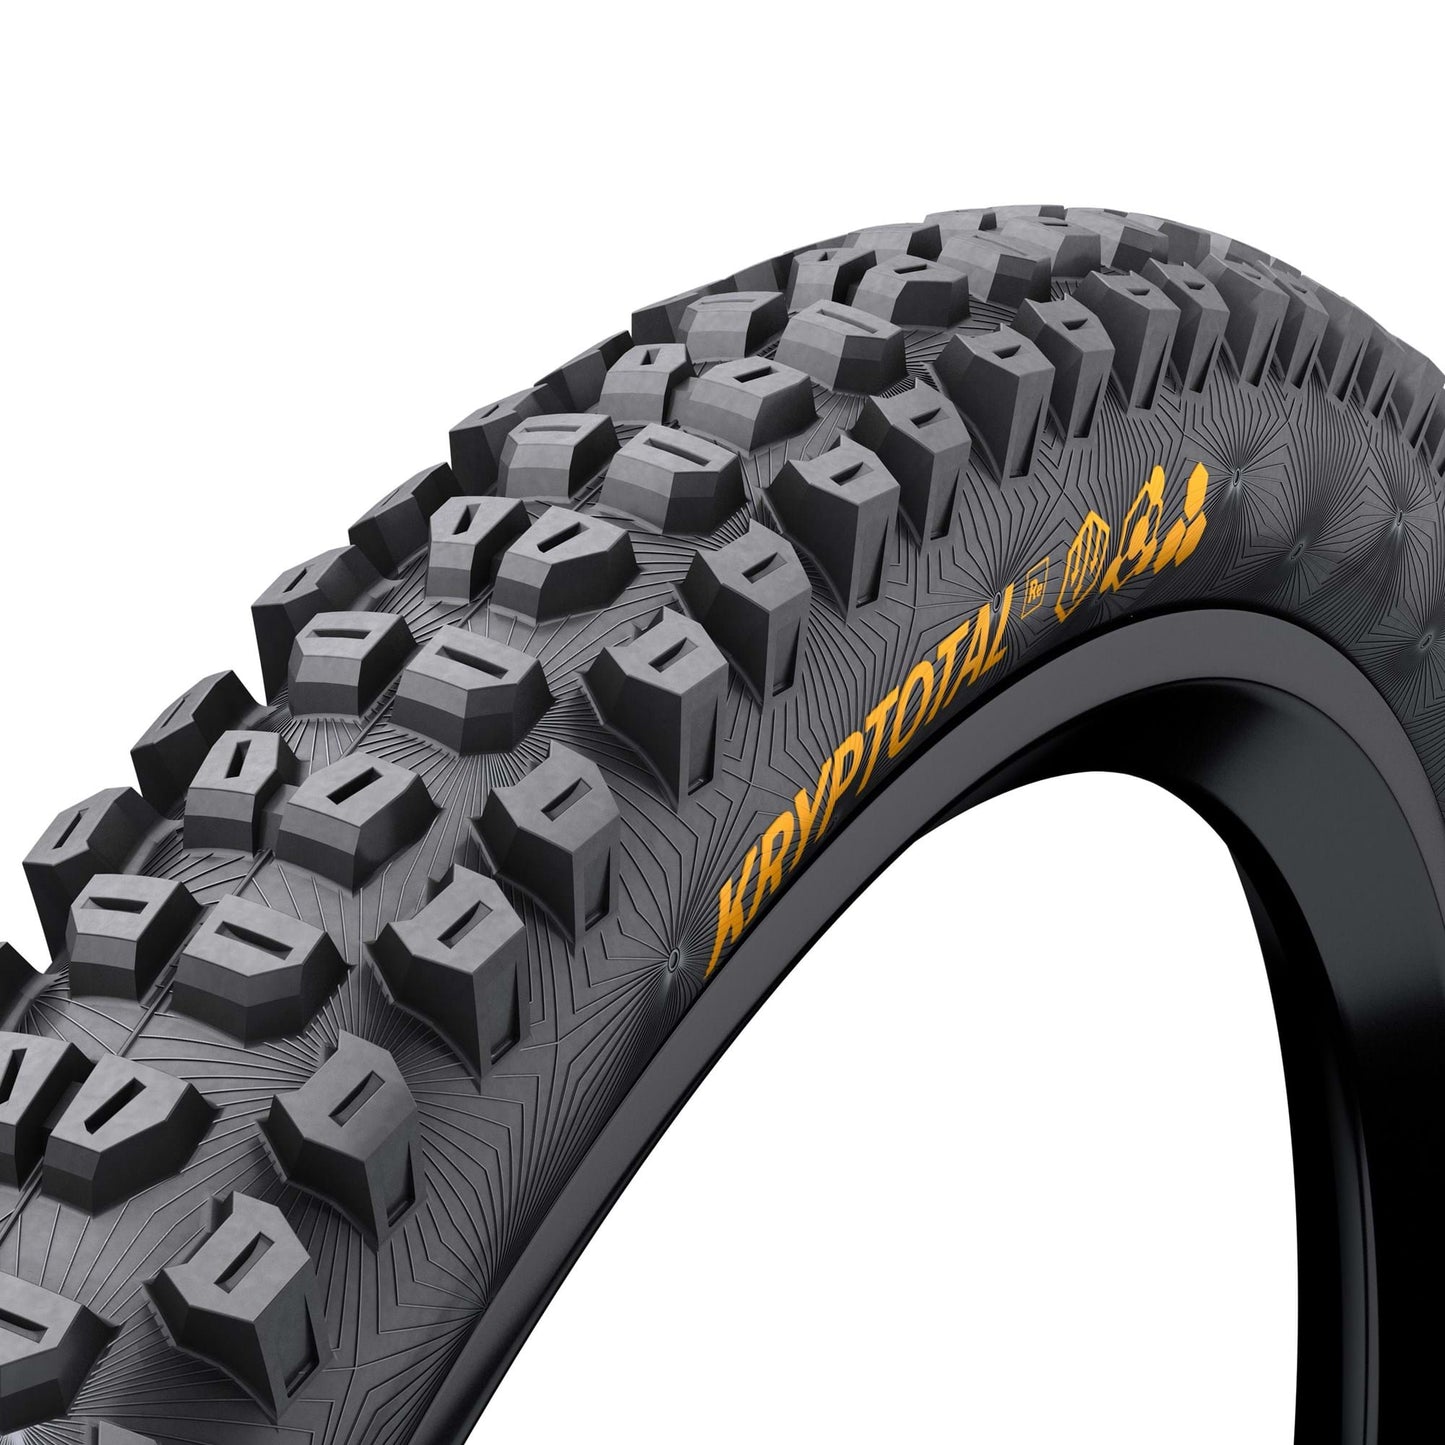 CONTINENTAL KRYPTOTAL REAR DOWNHILL TYRE - SOFT COMPOUND FOLDABLE - 29X2.40"